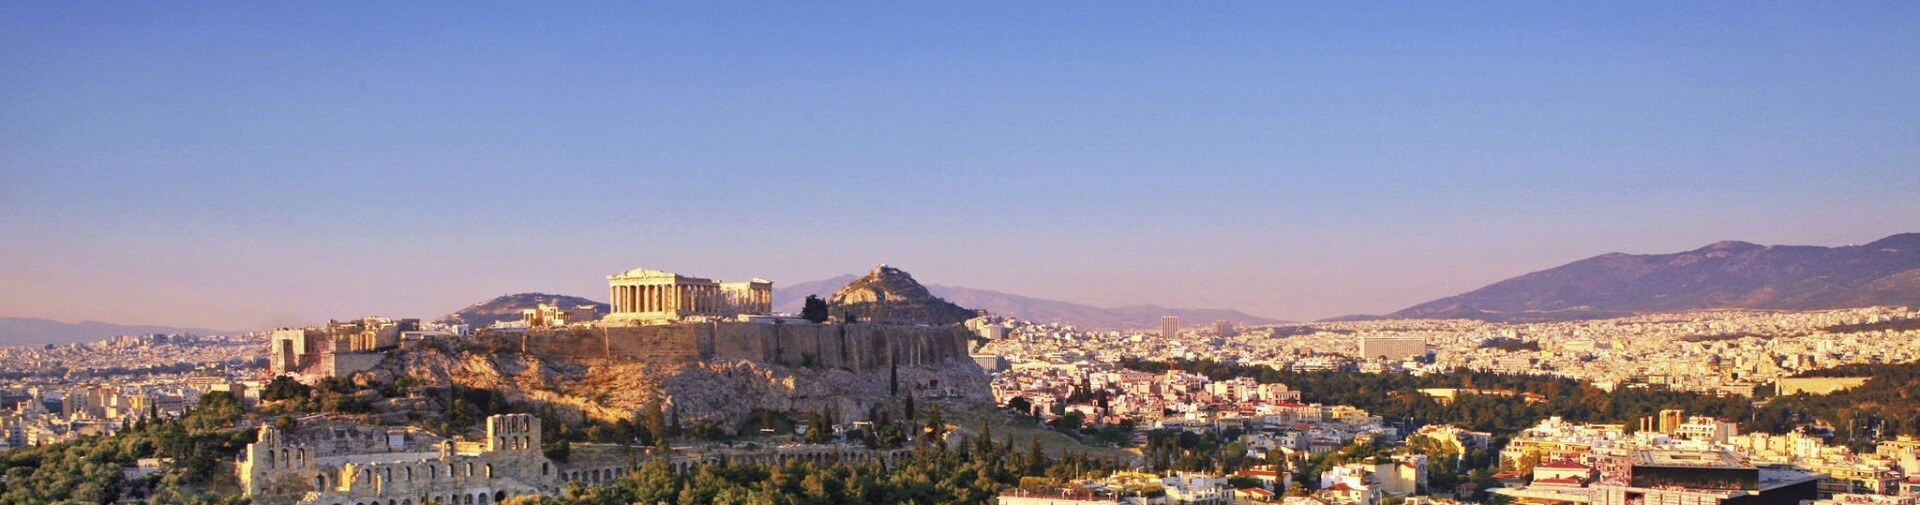 parthenon-greece-citizenship-by-investment-and-residency